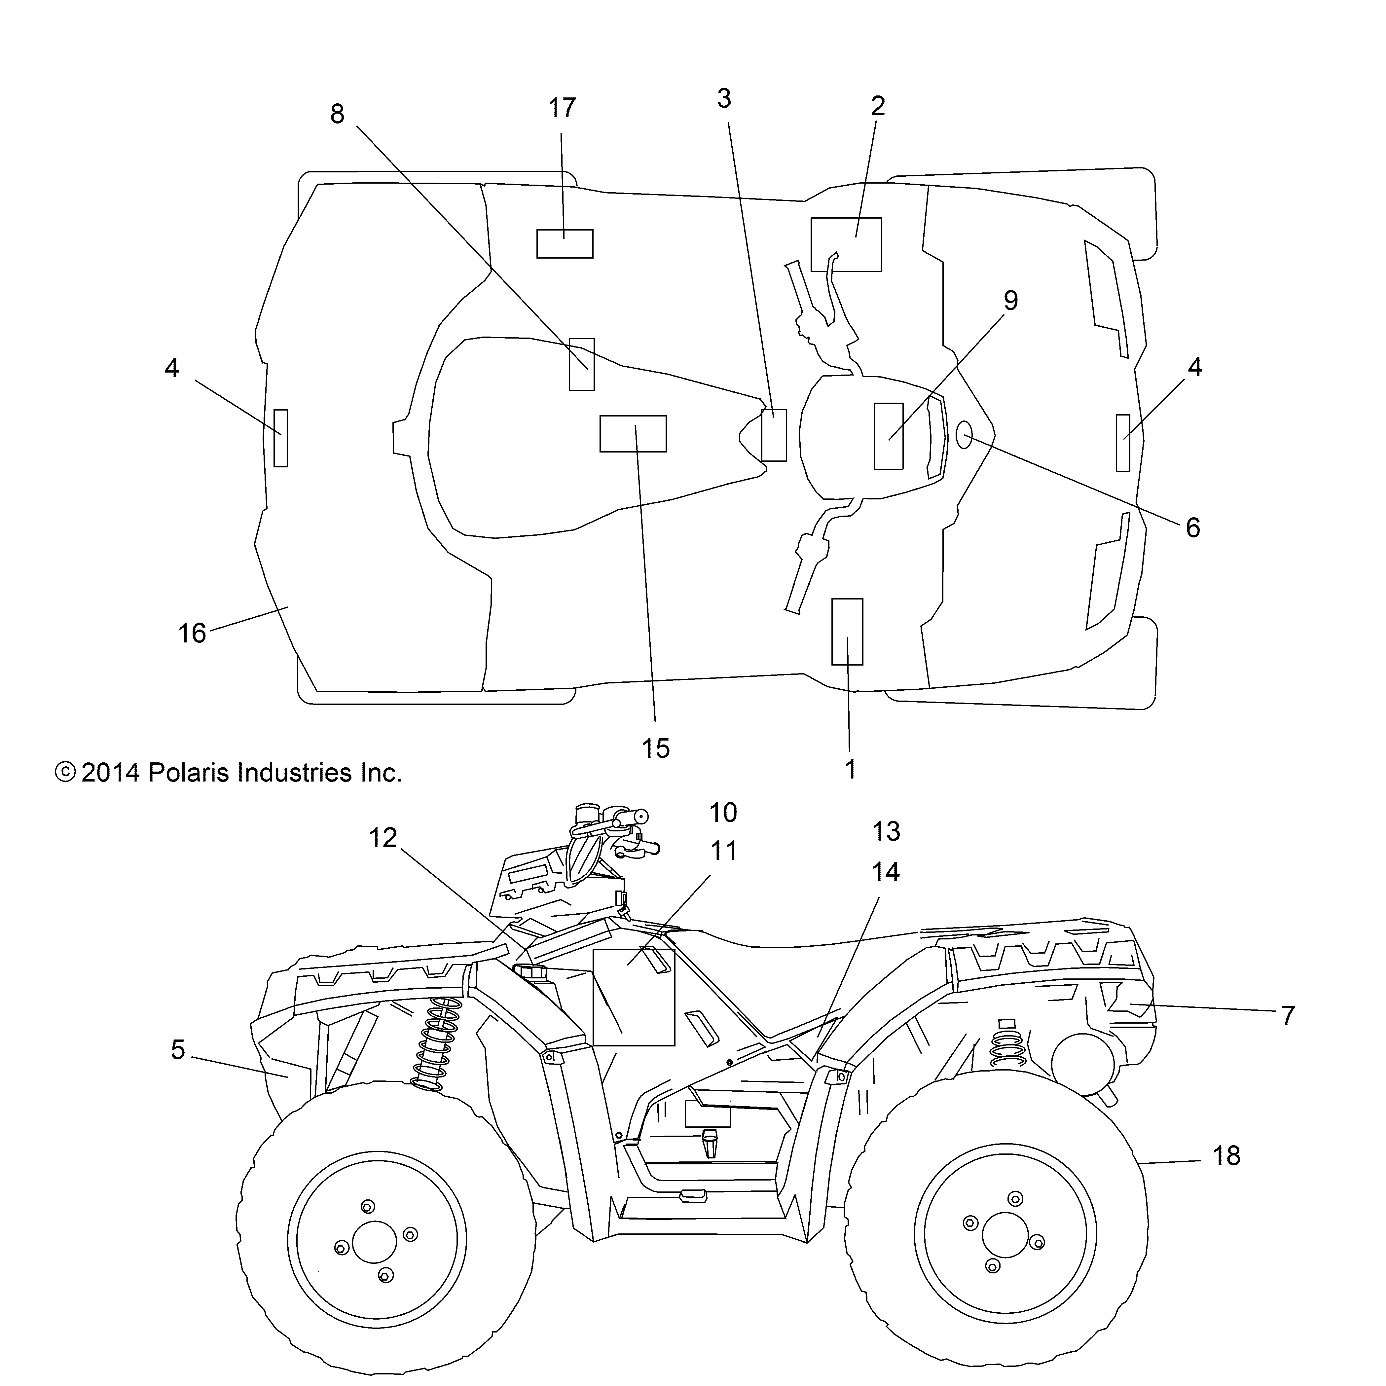 BODY, DECALS - A15SXE95HK (49ATVDECAL151MD)